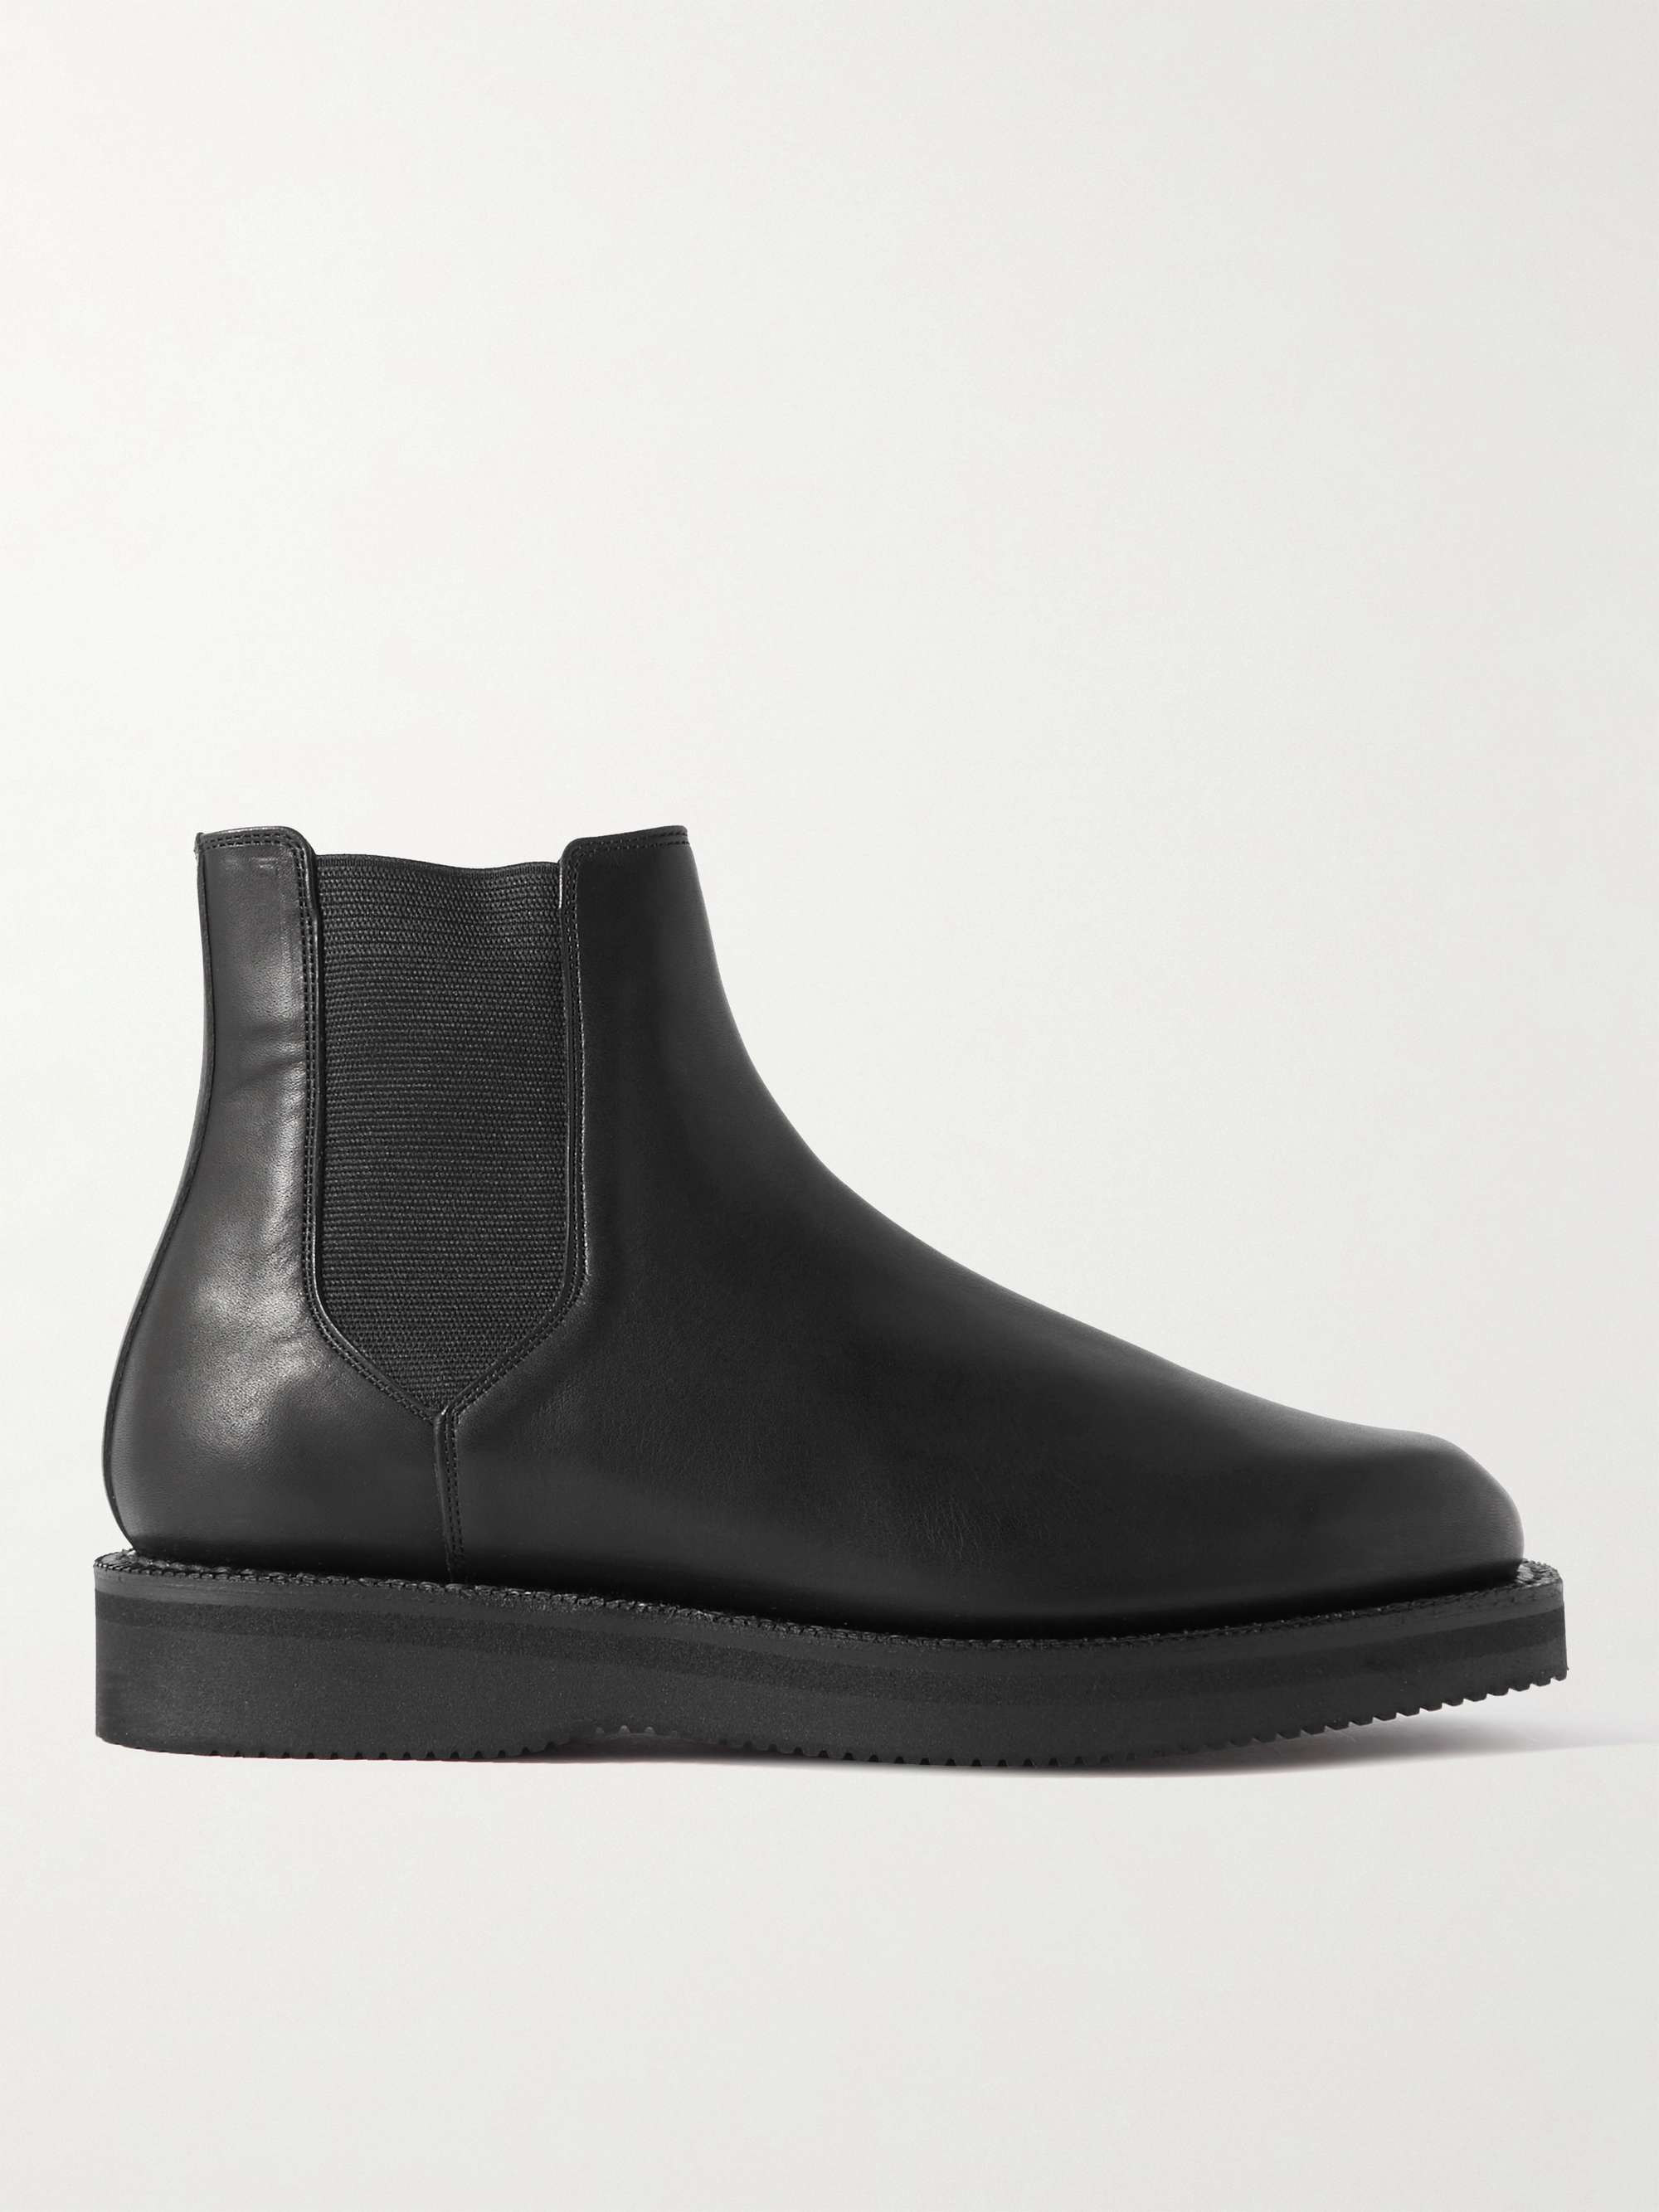 AURALEE Leather Chelsea Boots | MR PORTER